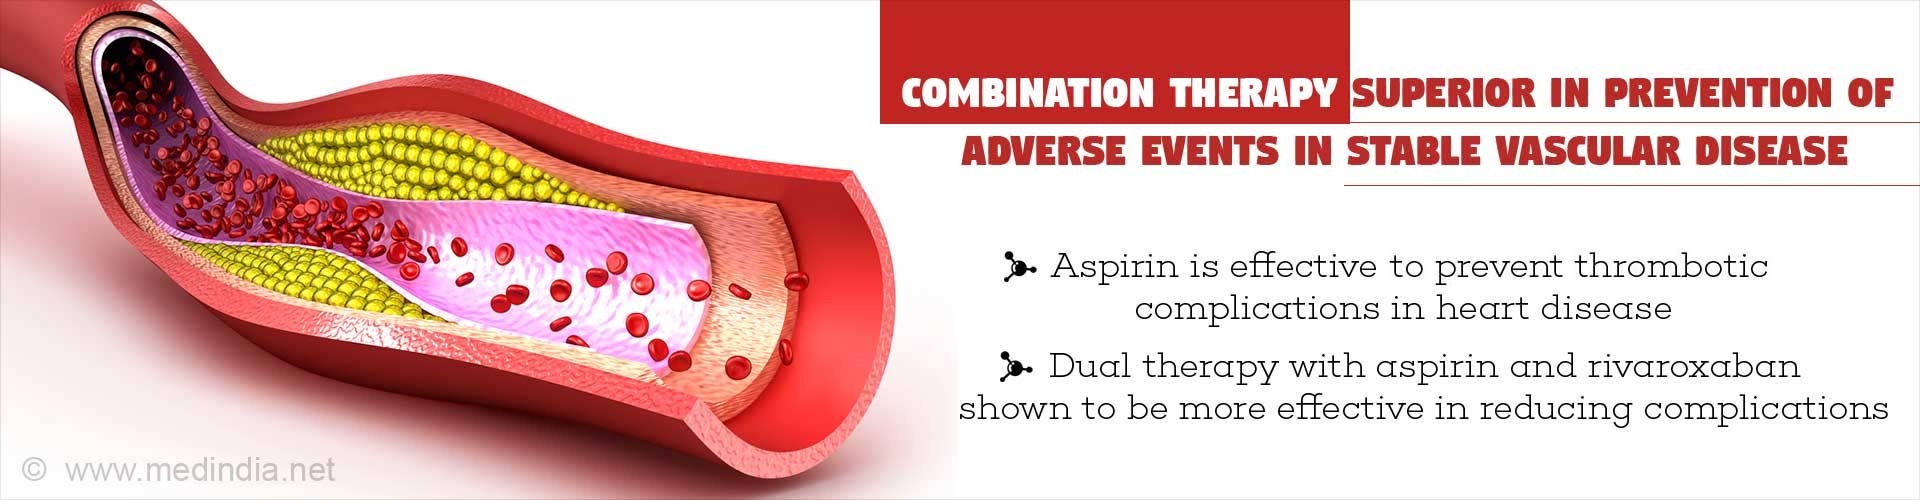 Combination therapy superior in prevention of adverse events in stable vascular disease
- Aspirin is effective to prevent thrombotic complications in heart disease
- Dual therapy with aspirin and rivaroxaban shown to be more effective in reducing complicaions